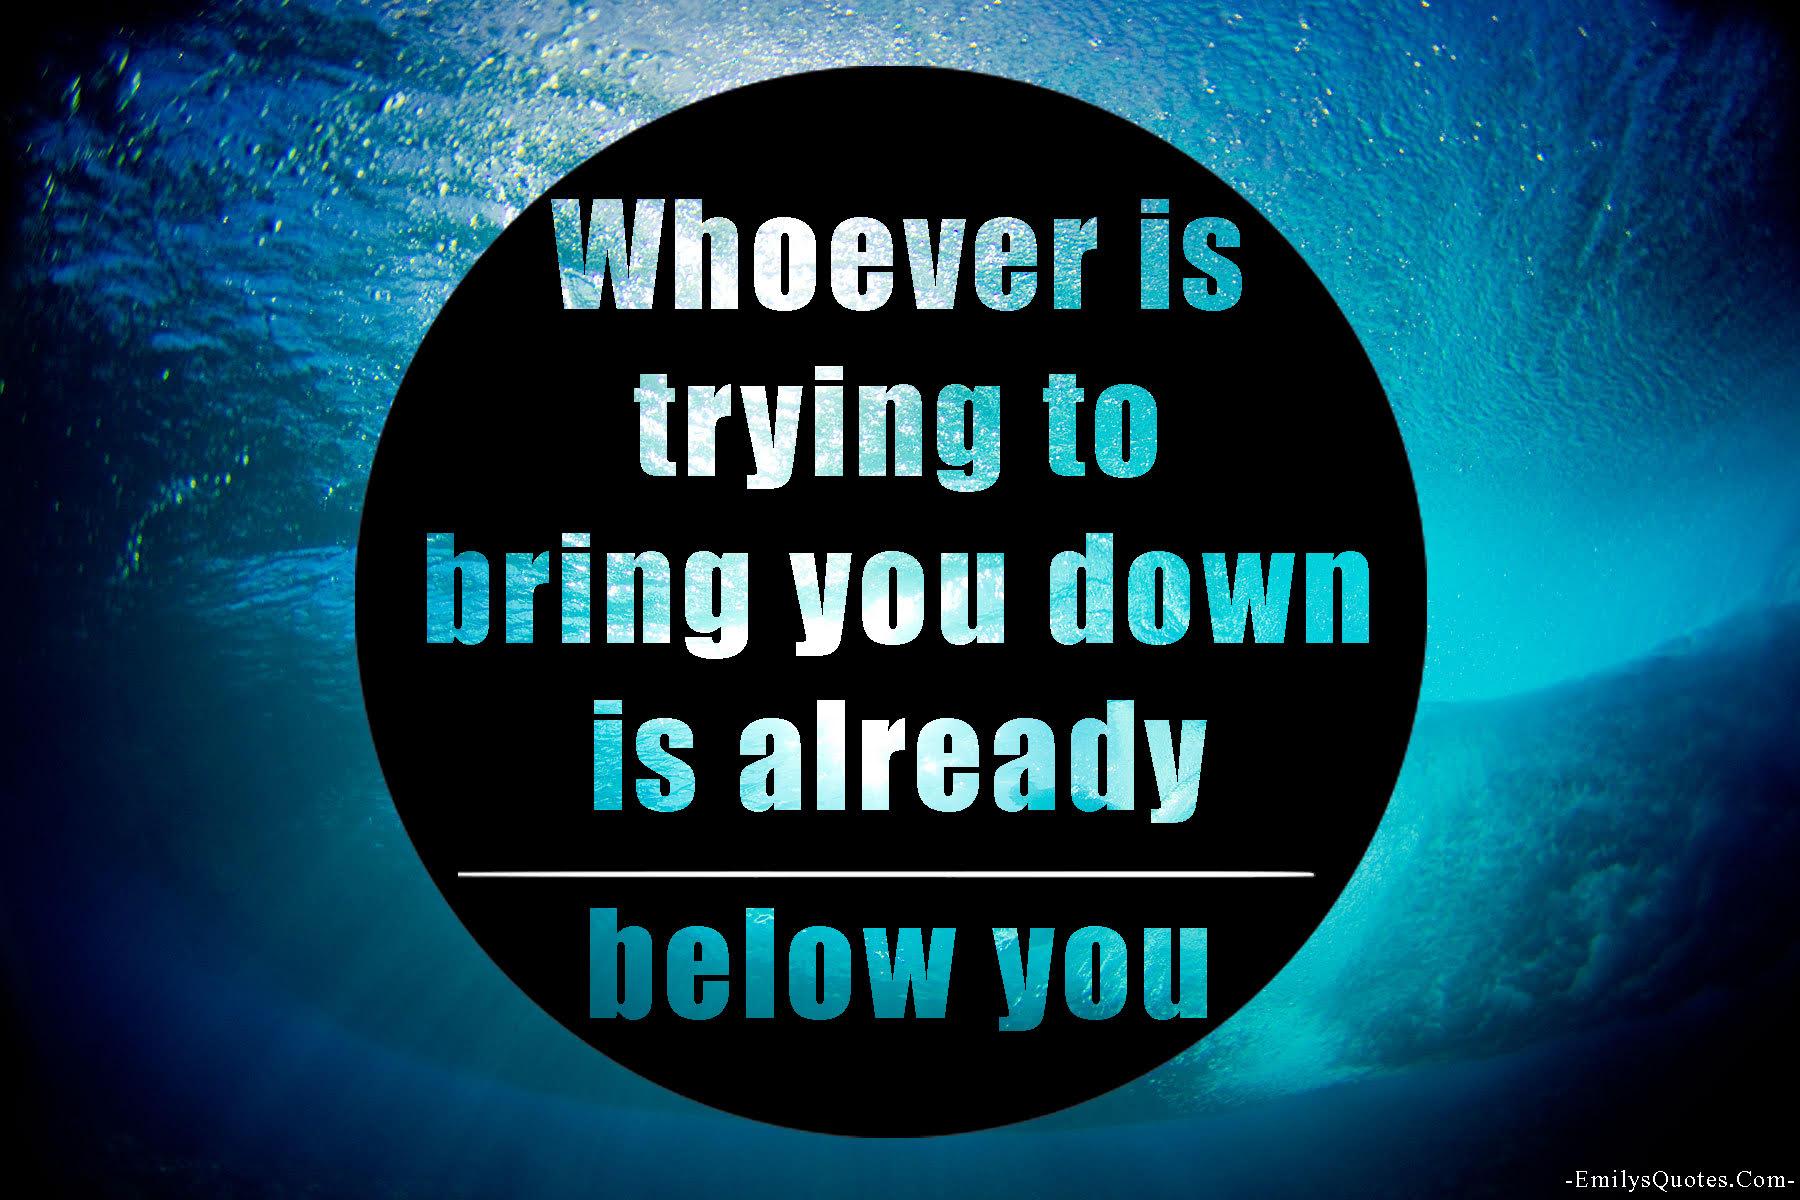 whoever is trying to bring you down is already below you